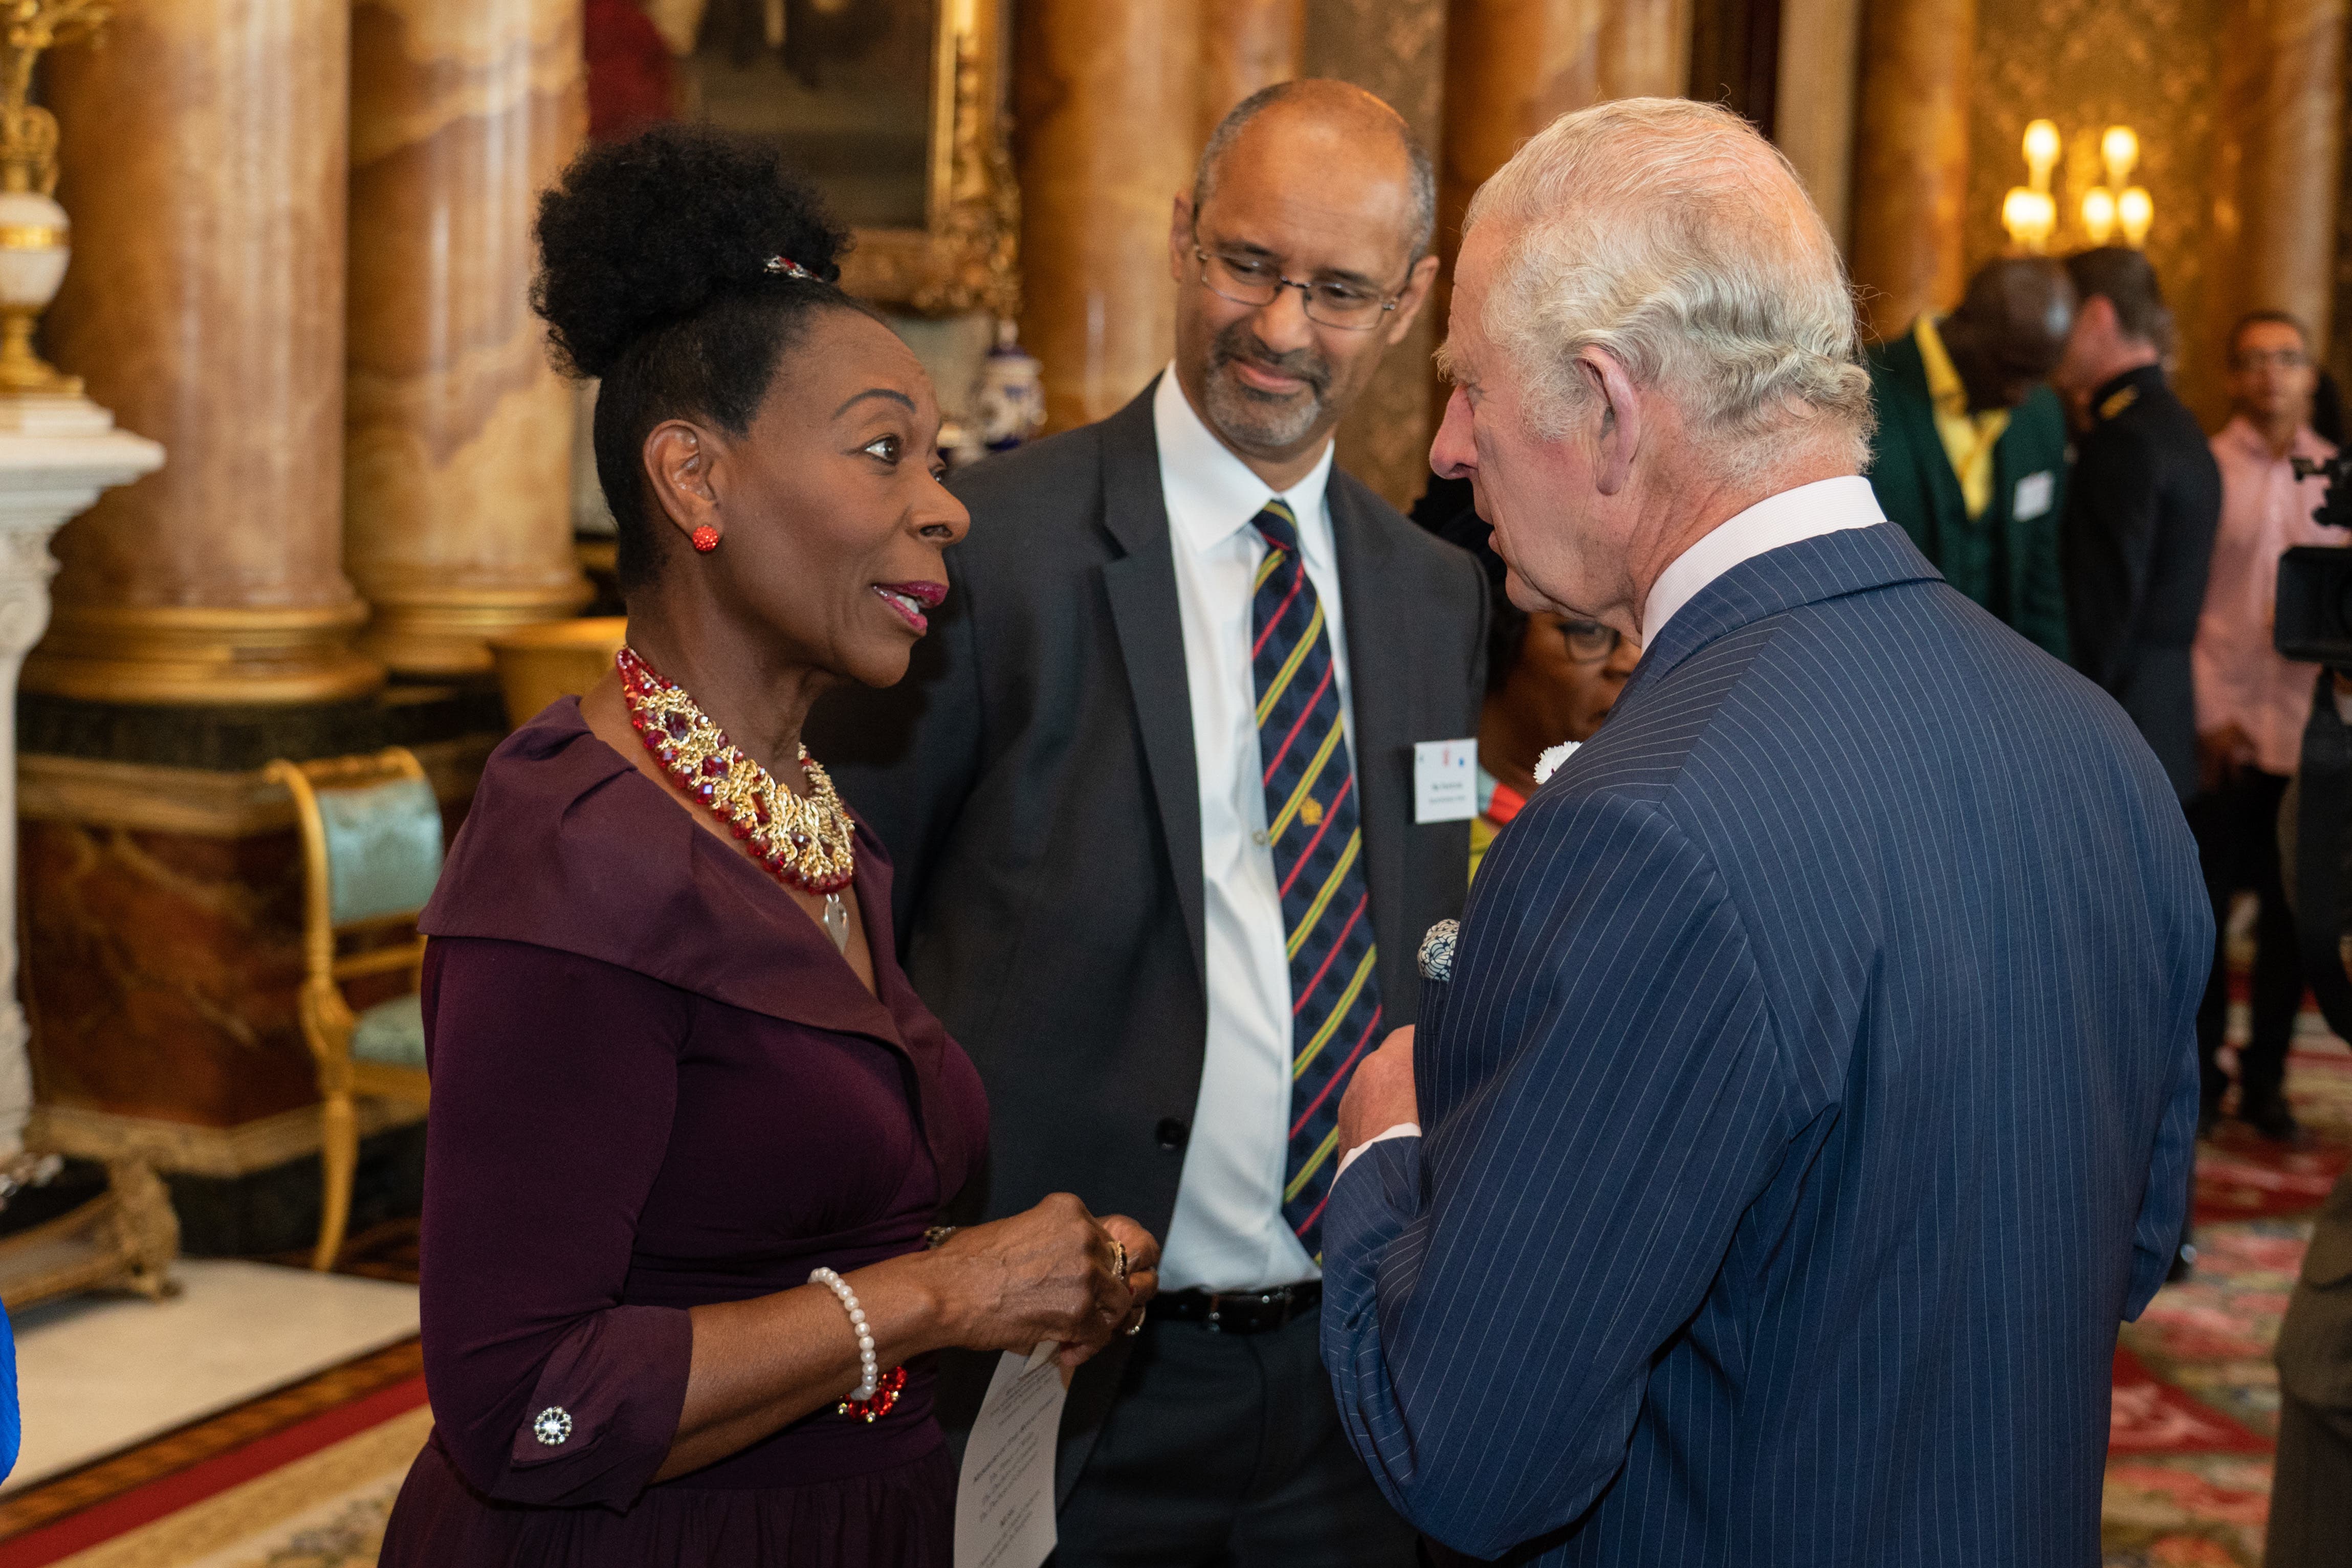 Baroness Benjamin says inclusion for King's coronation shows he's embracing  diversity - Mirror Online